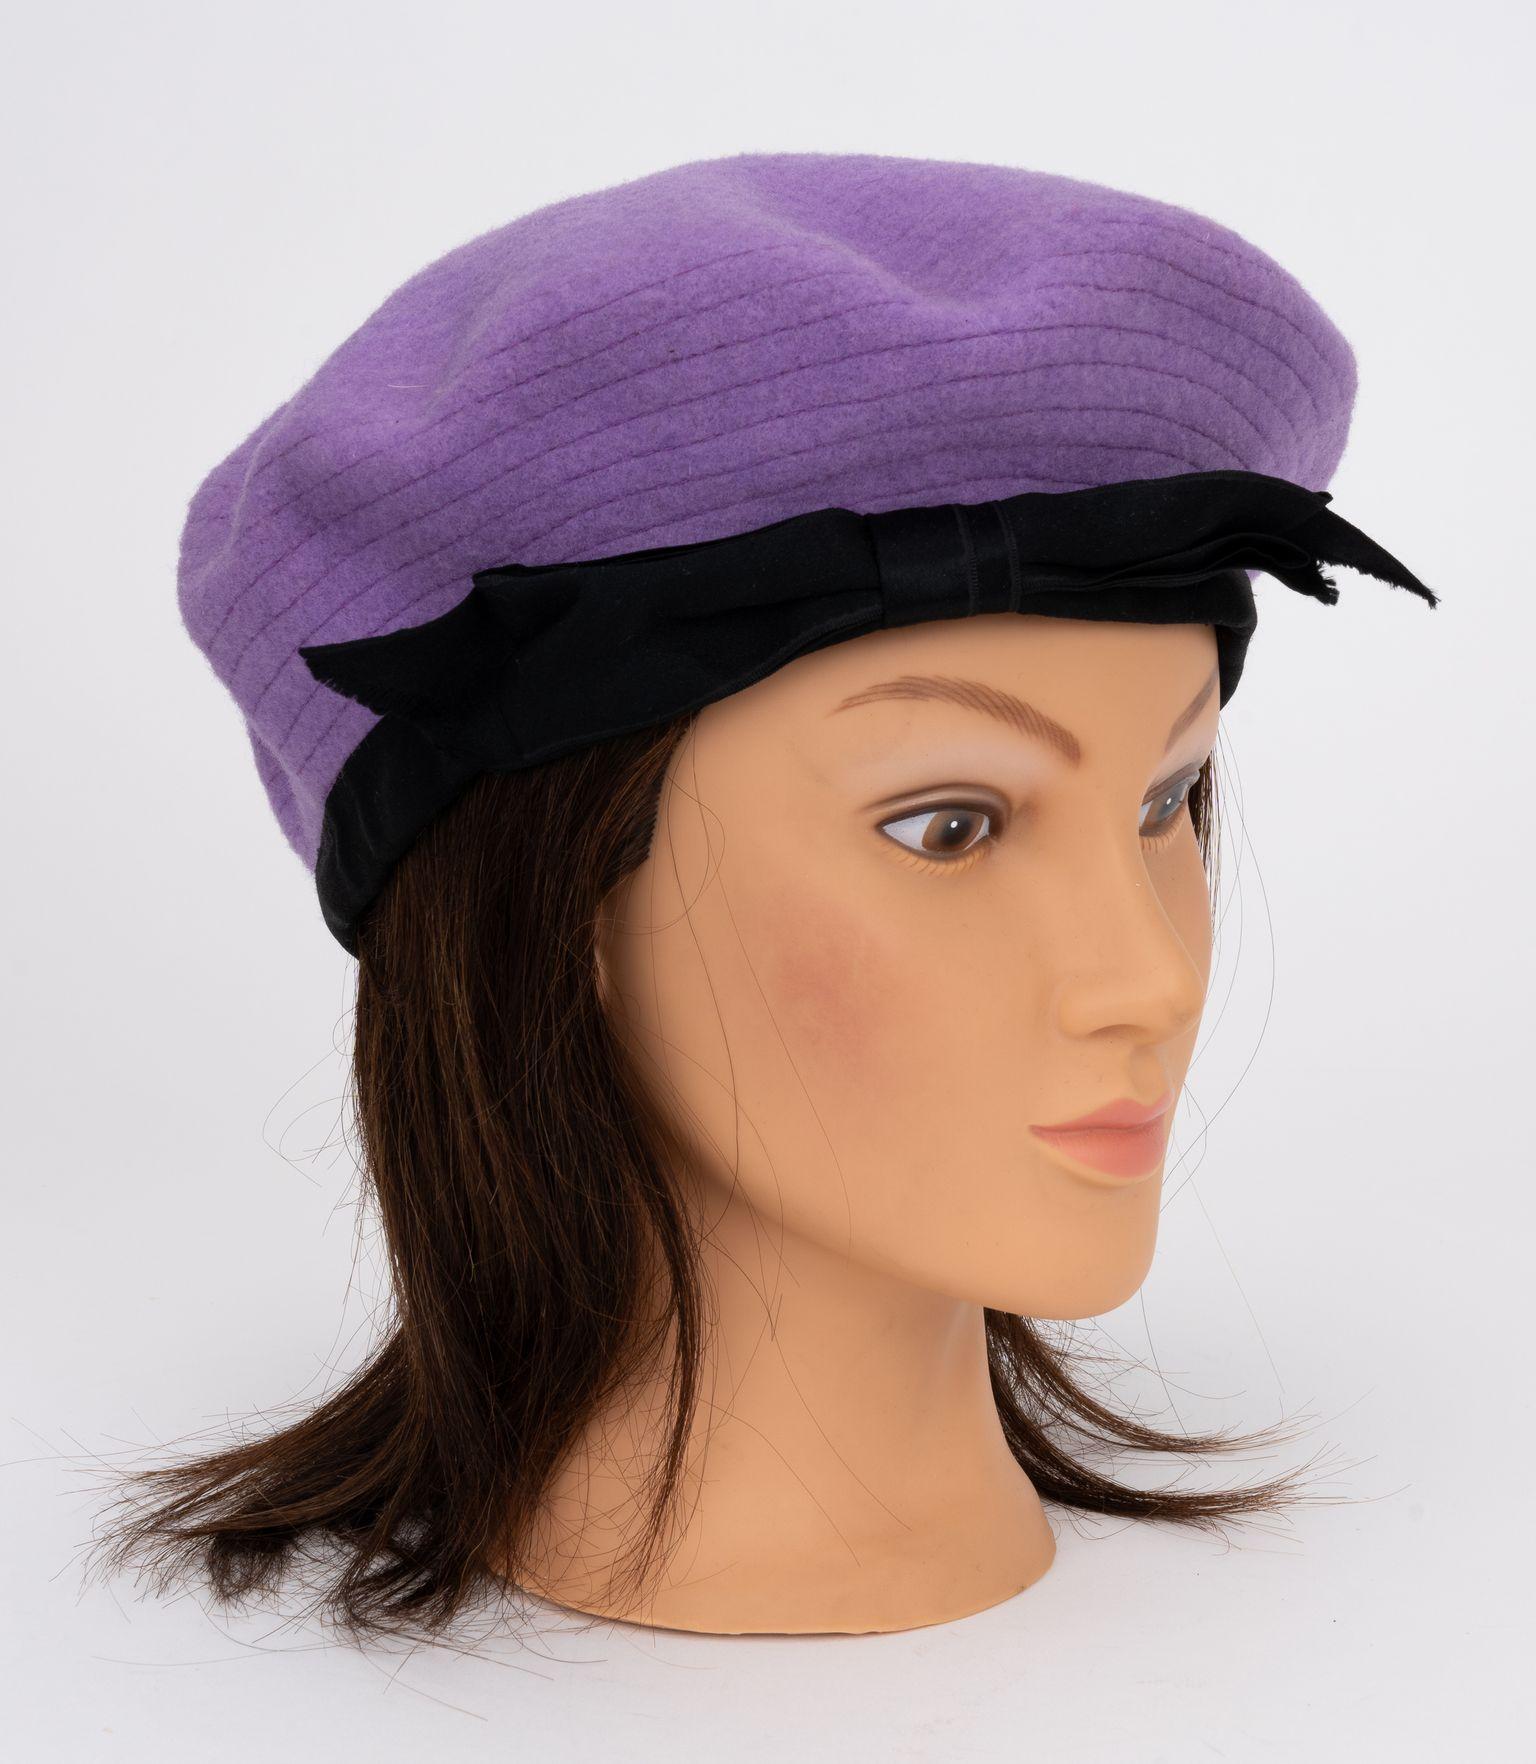 Chanel lilac wool beret with gros grain black ribbon. Chanel label inside. Excellent condition.